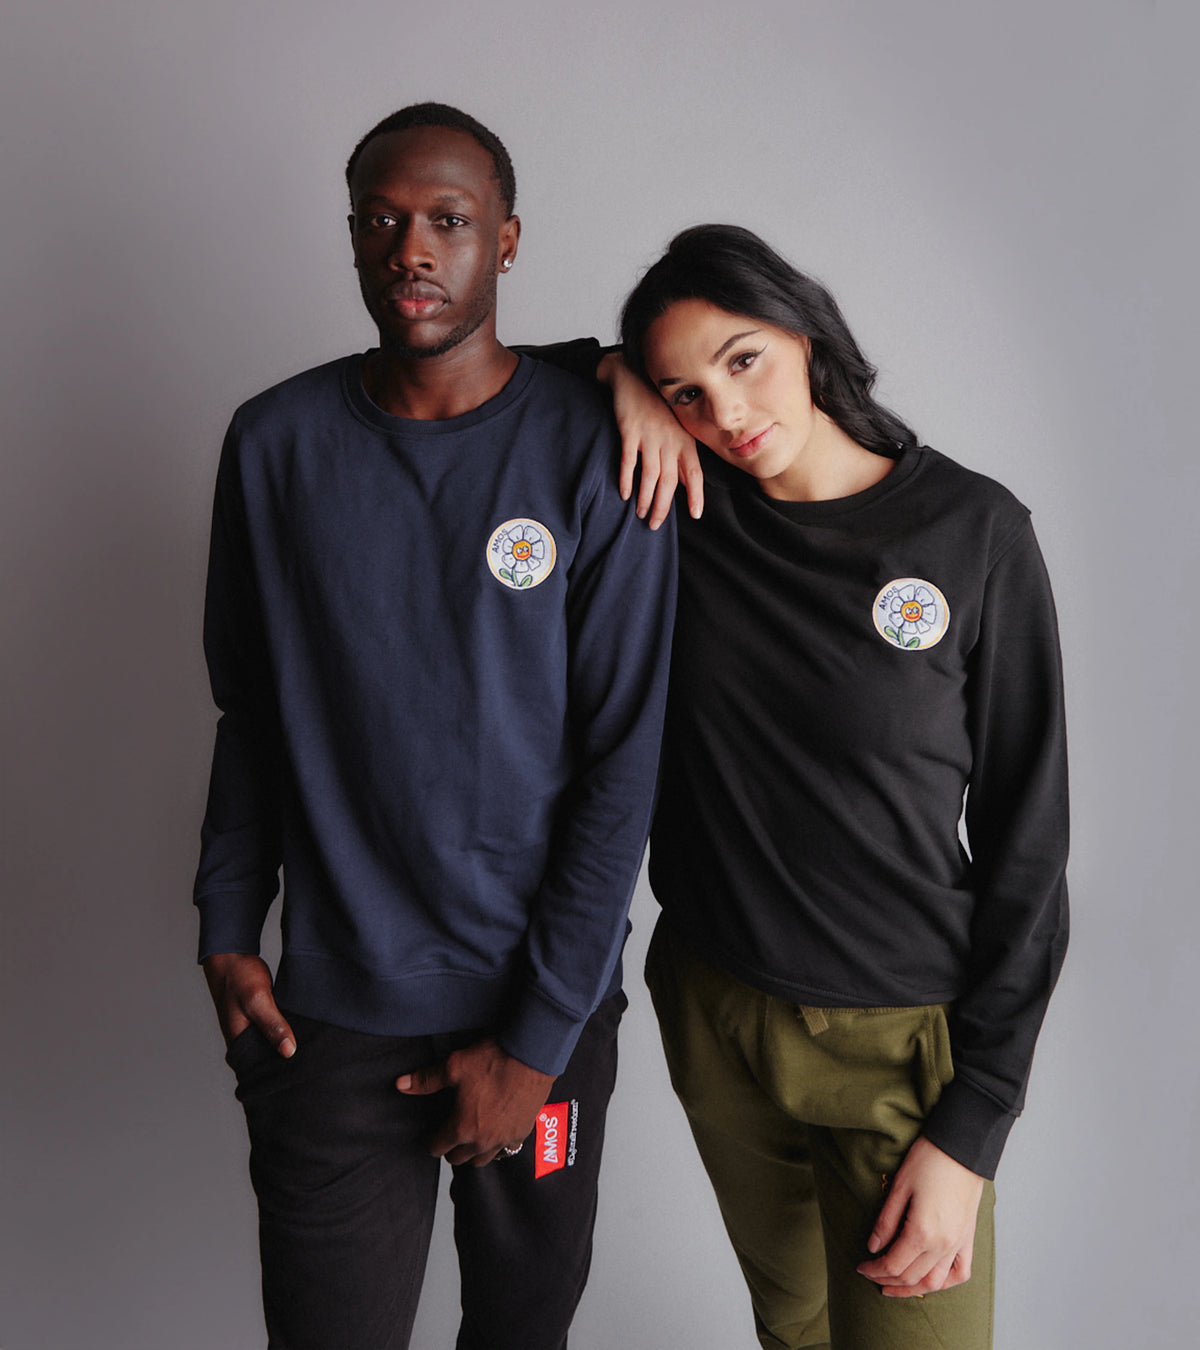 Embroidered Organic Sweatshirts - Why So Serious